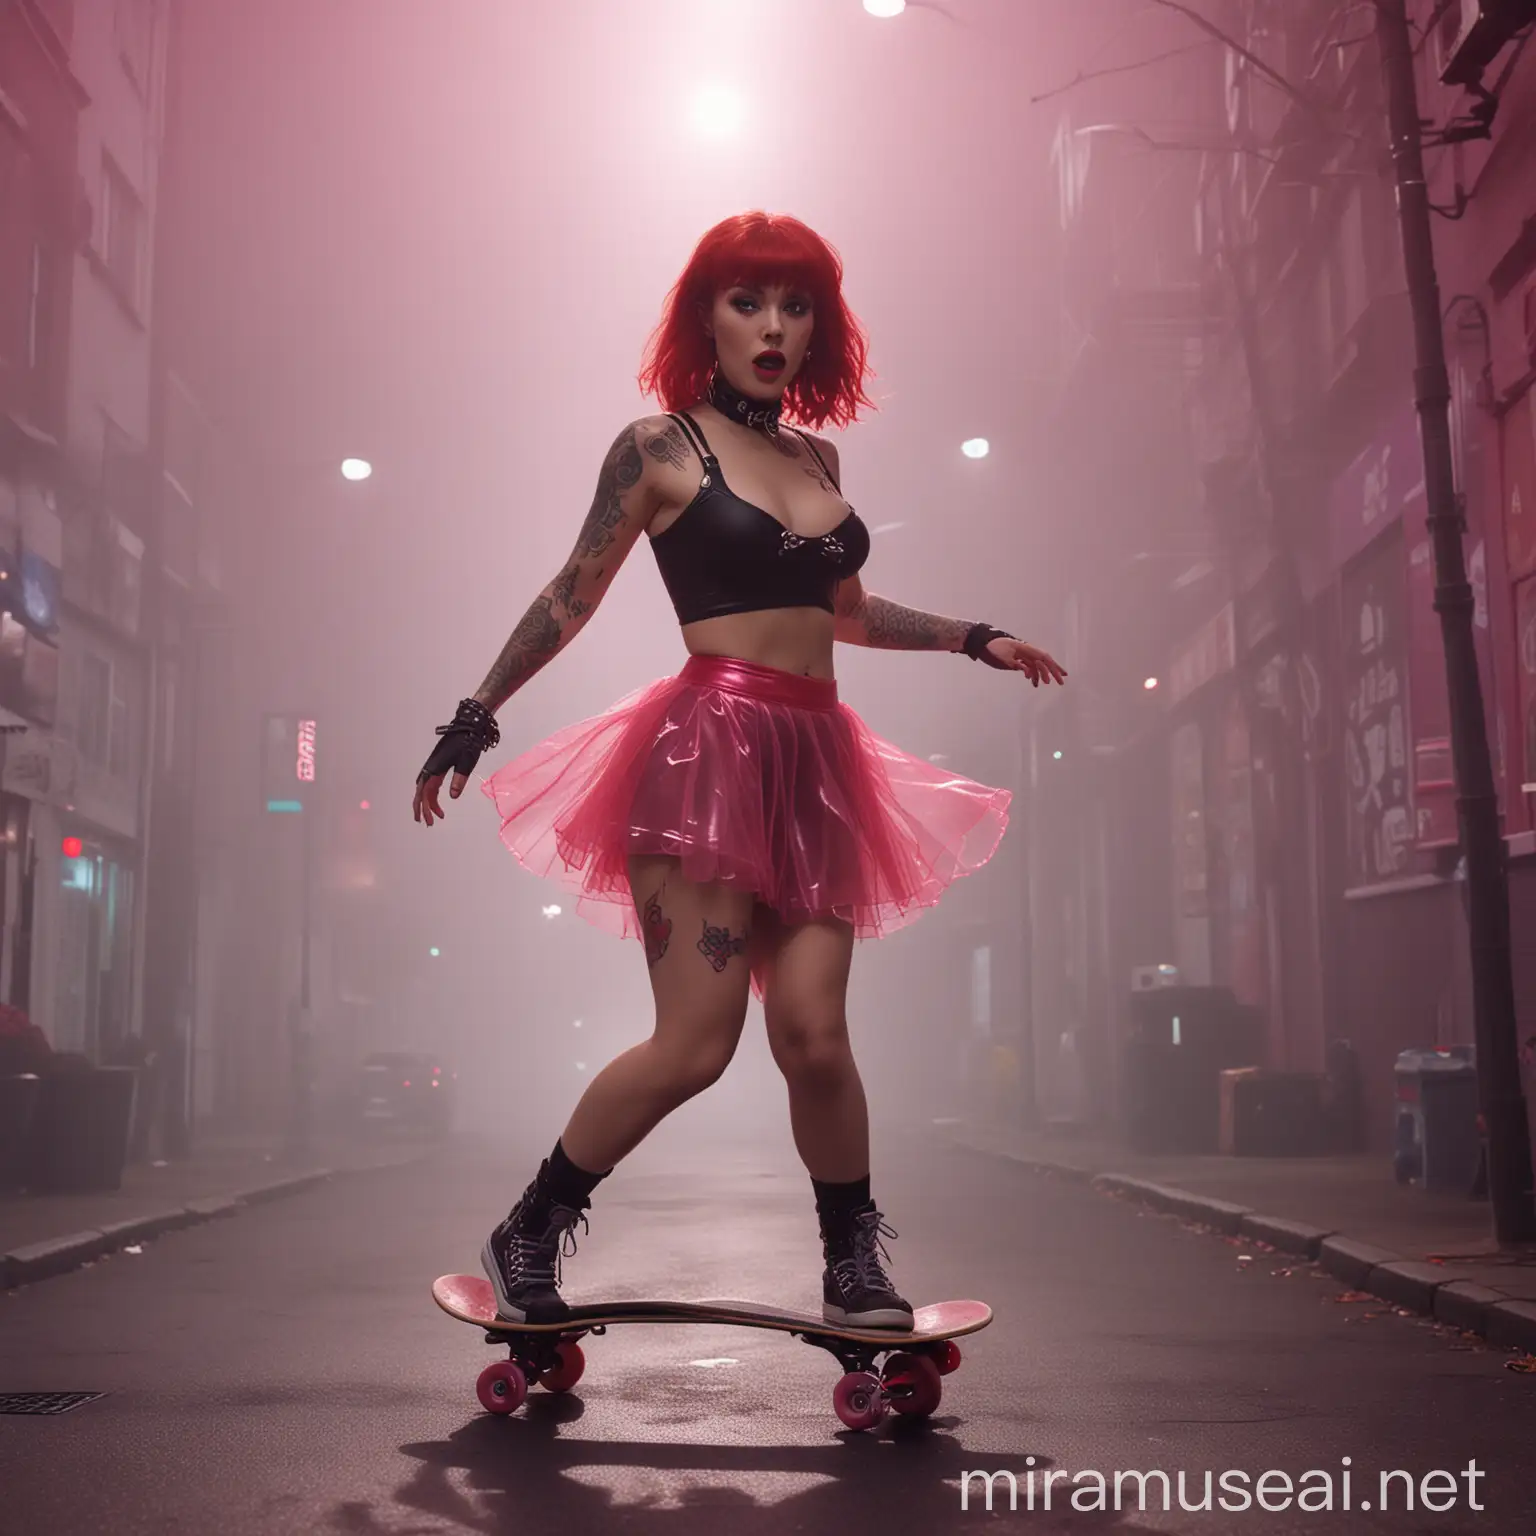 Vibrant RedHaired Gothic Skater Girl in Metallic Robot Style Synthwave Atmosphere